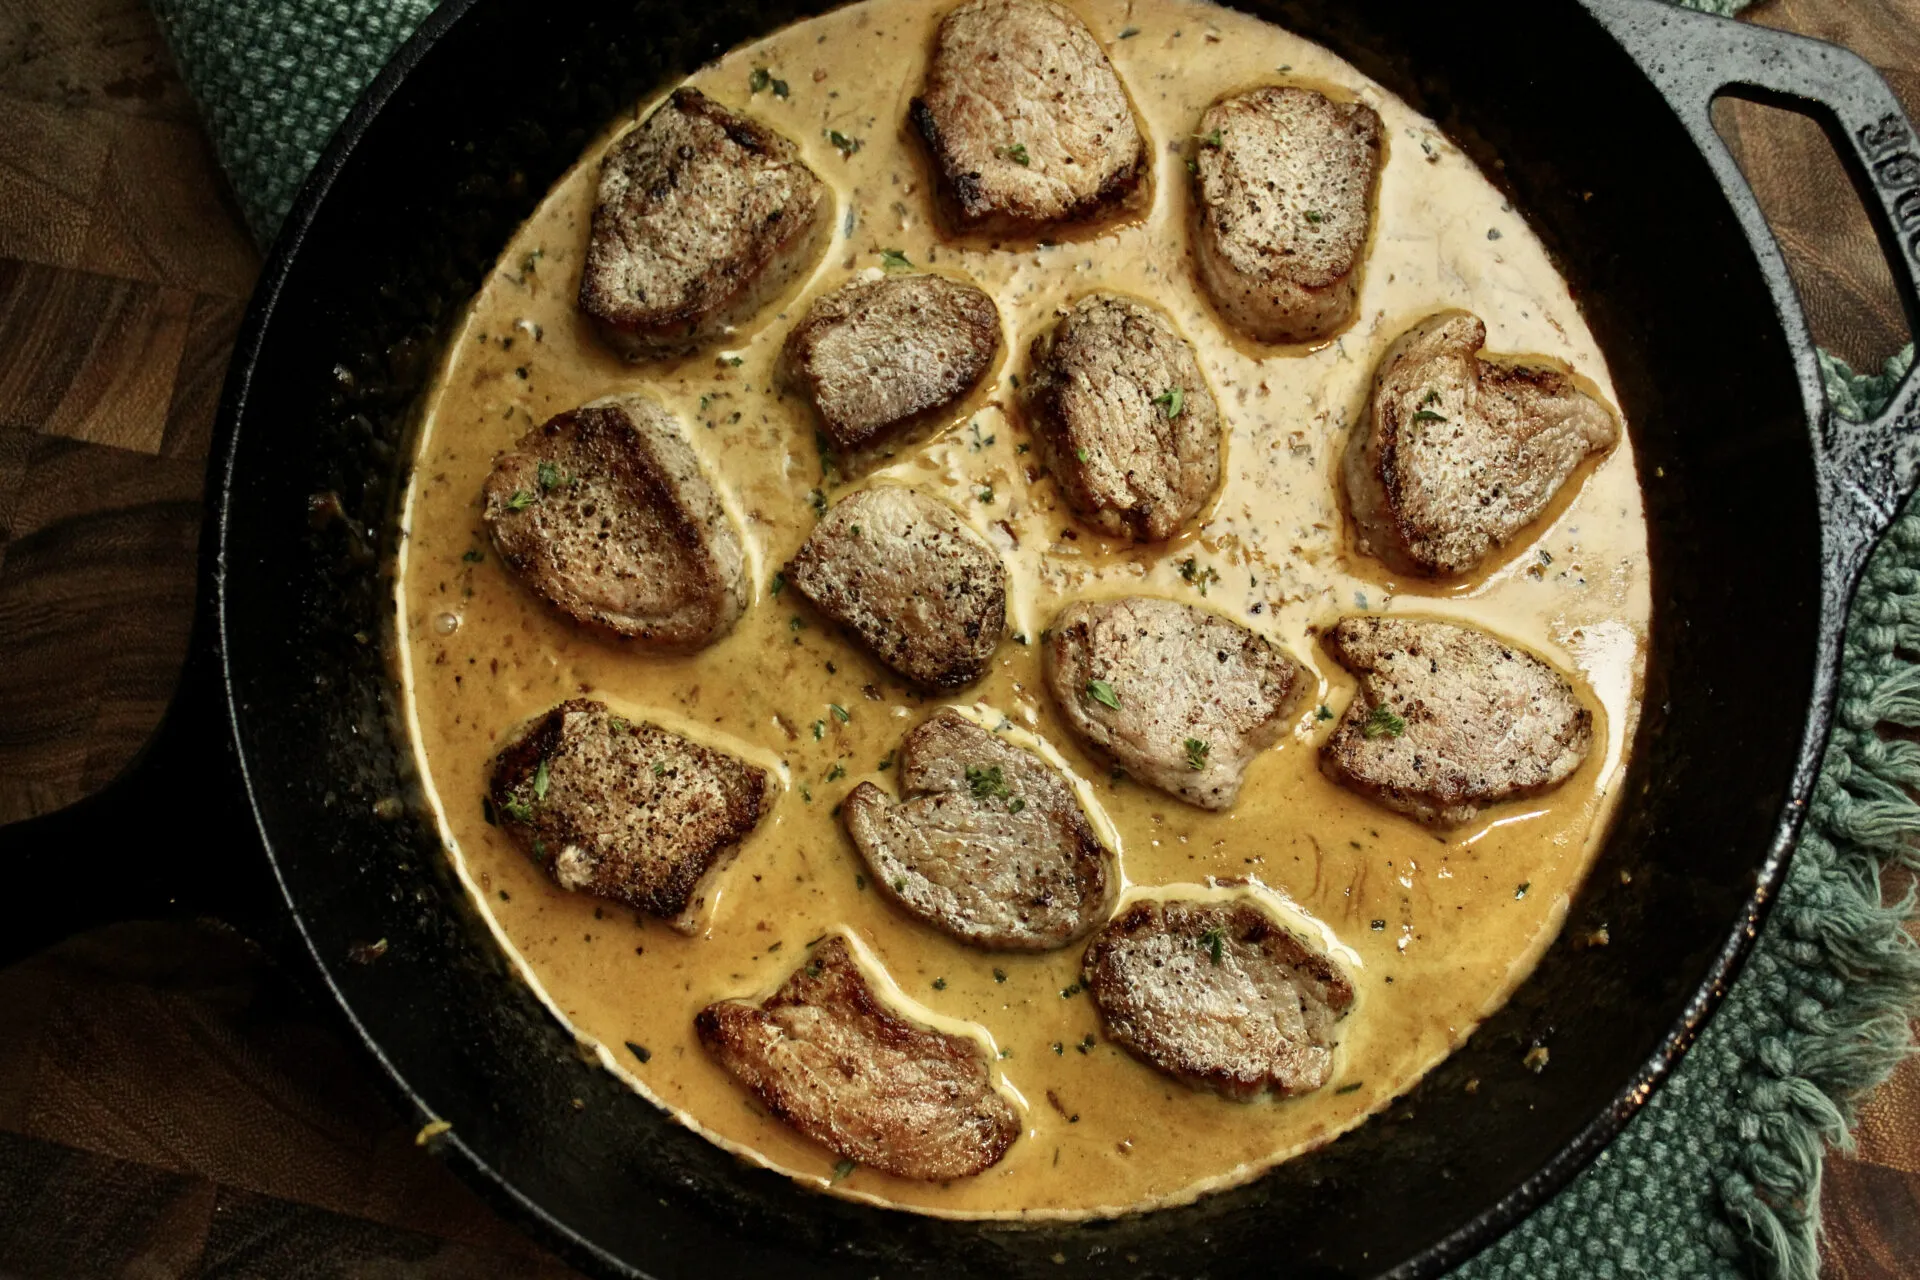 Pork Marsala made with a creamy-mustard sauce and pork medallions. The sauce is the key here, but feel free to substitute any protein of your choice!